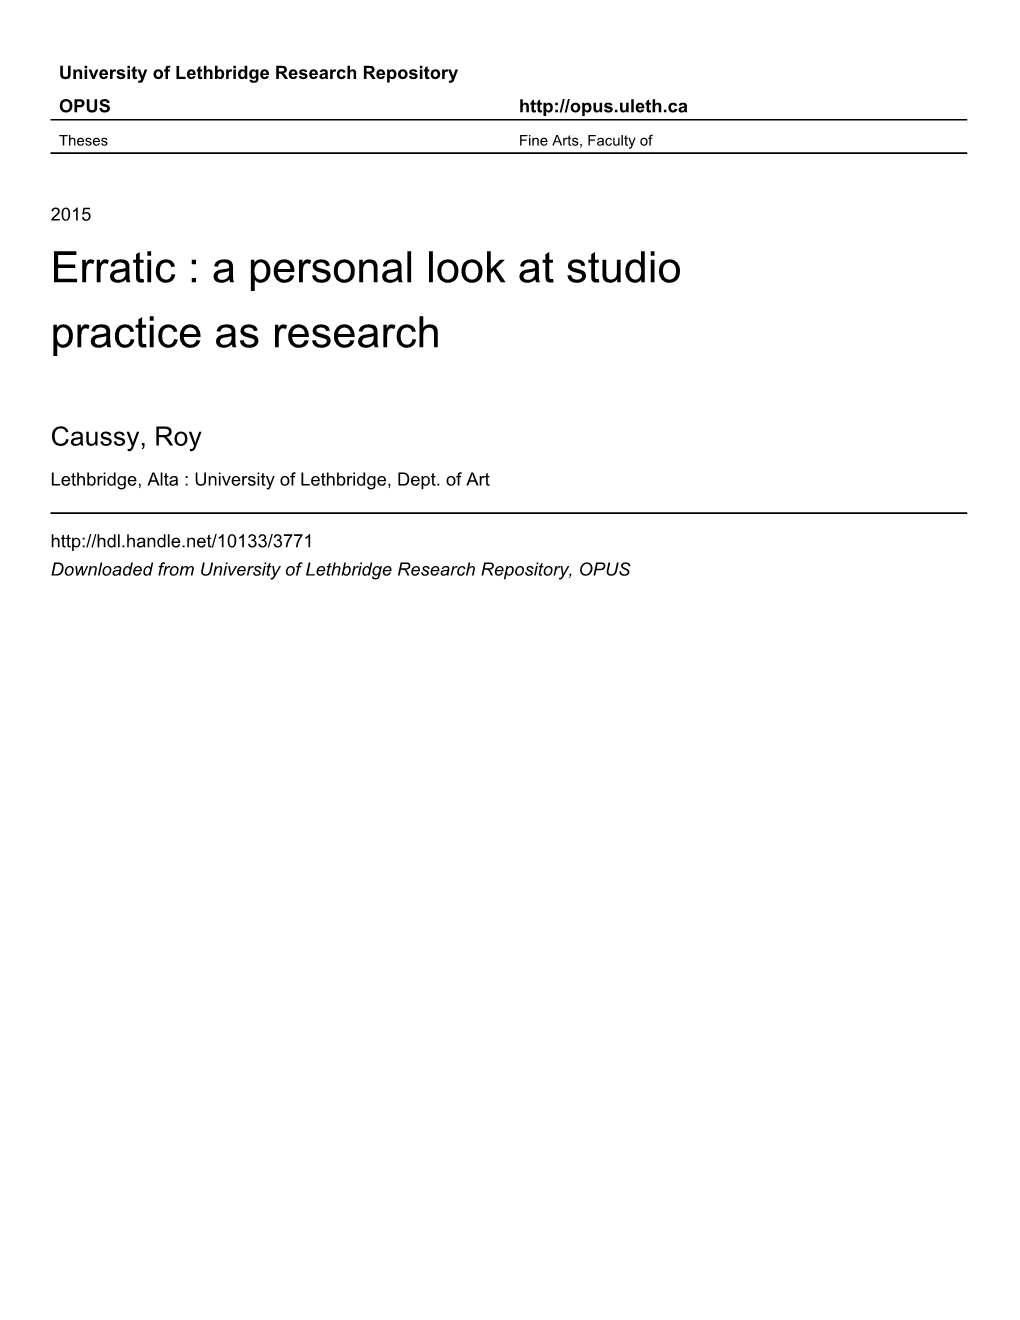 A Personal Look at Studio Practice As Research